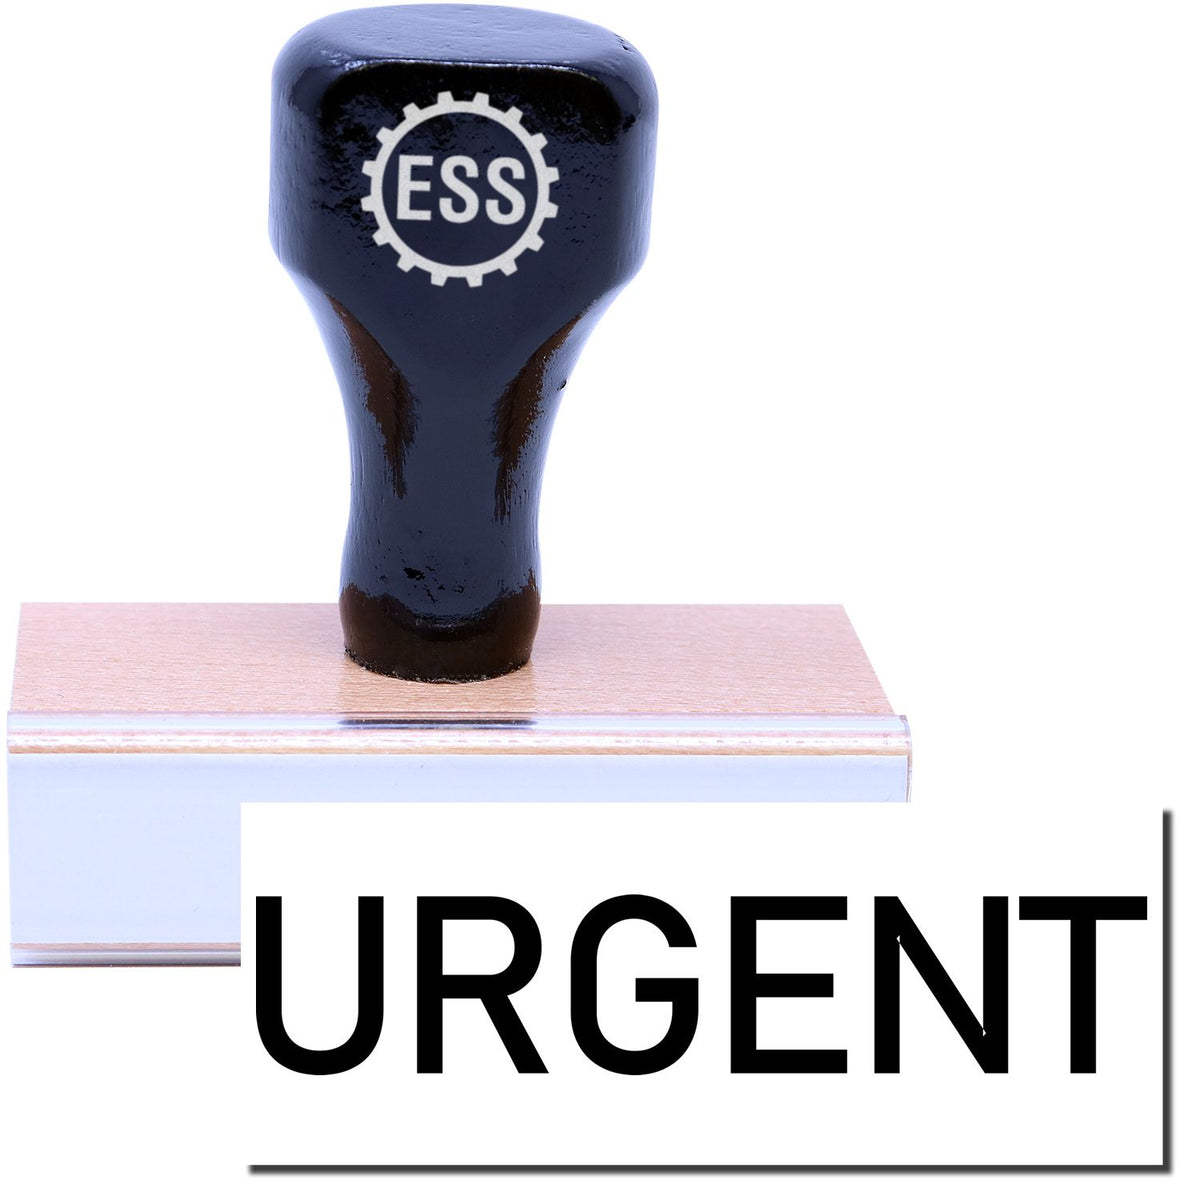 A stock office rubber stamp with a stamped image showing how the text &quot;URGENT&quot; in a narrow font is displayed after stamping.